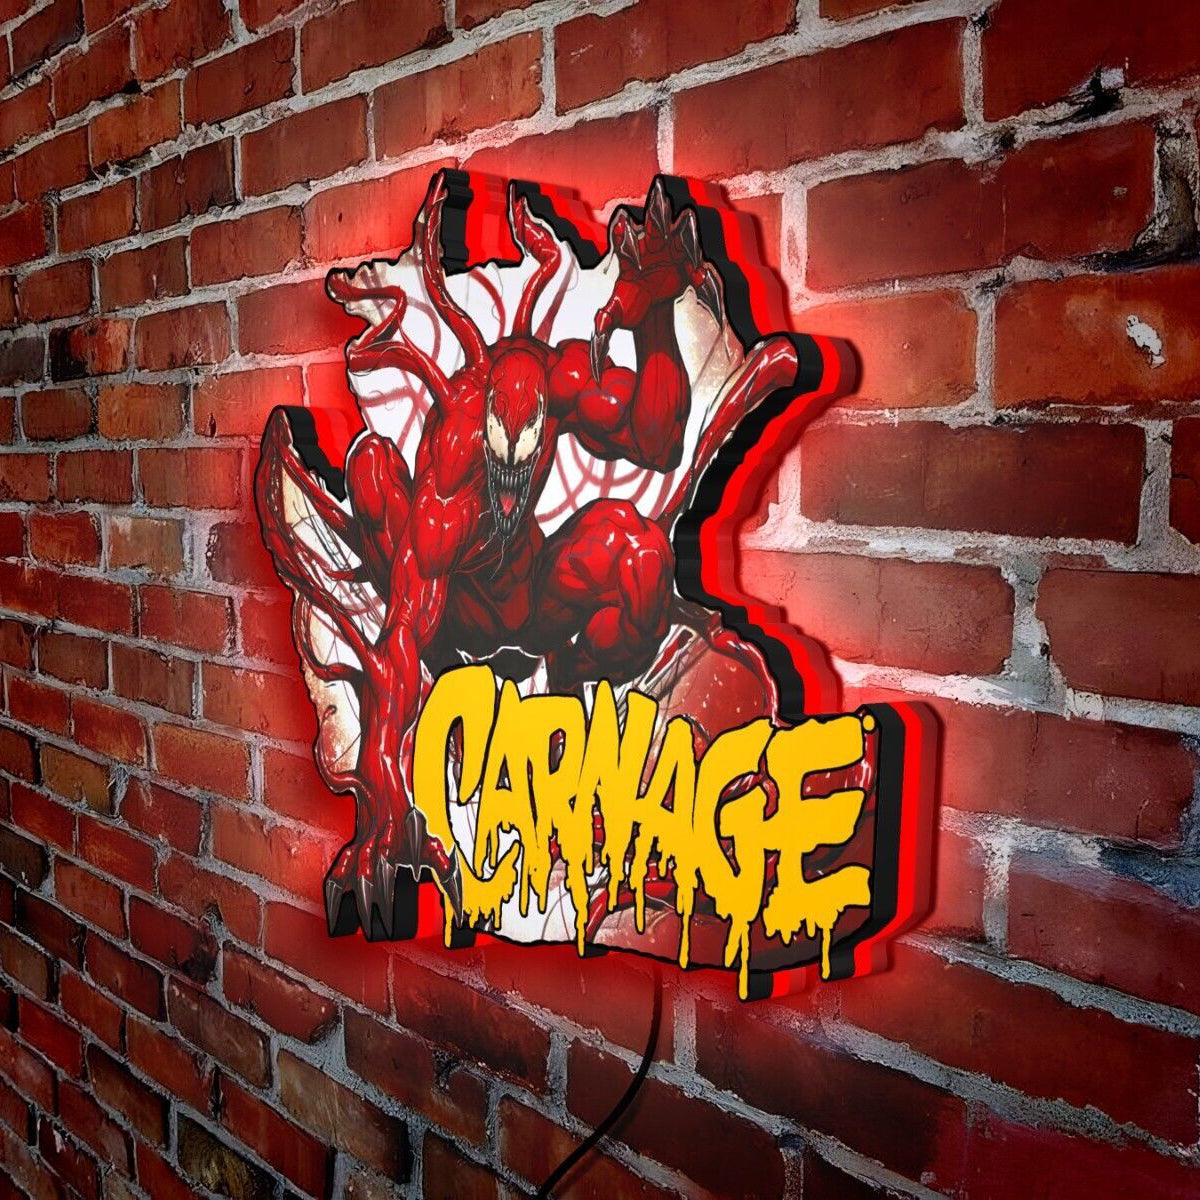 Menacing Carnage LED Sign Dimmeable USB Powered - FYLZGO Signs